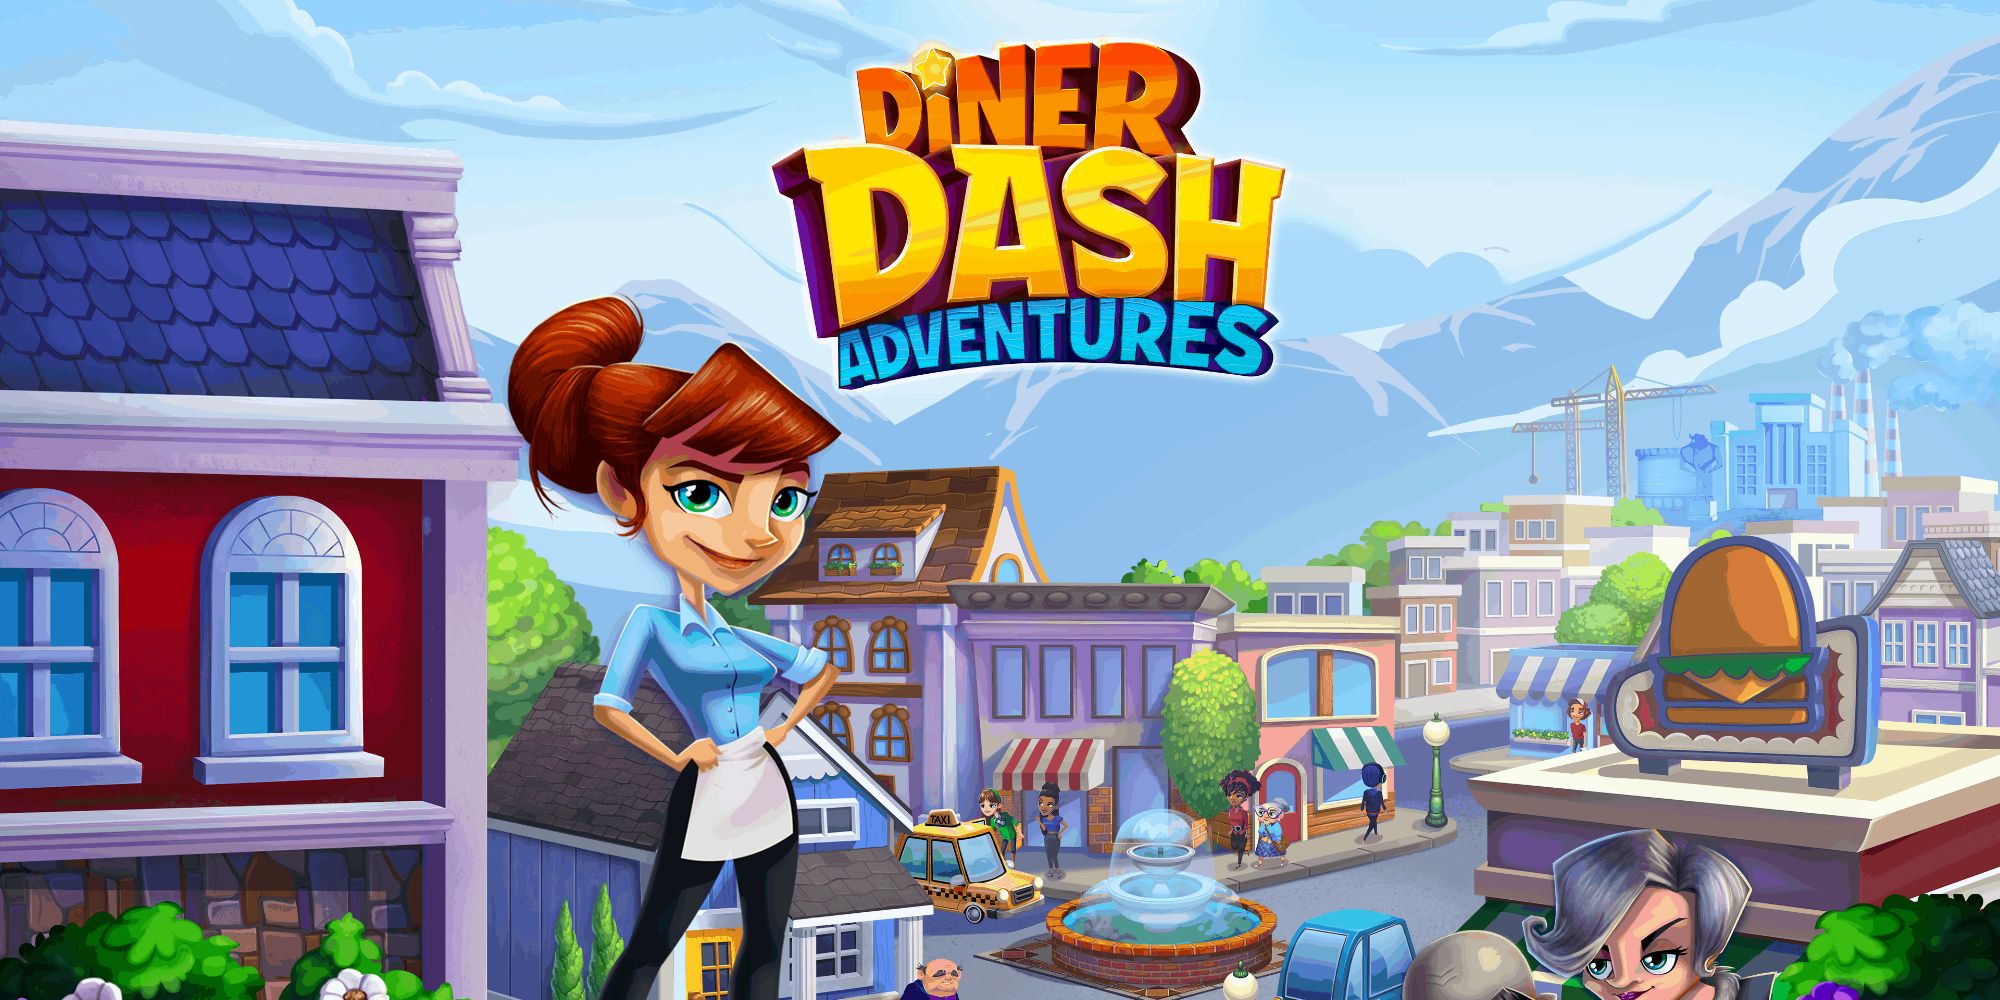 The title image for Diner Dash Adventures